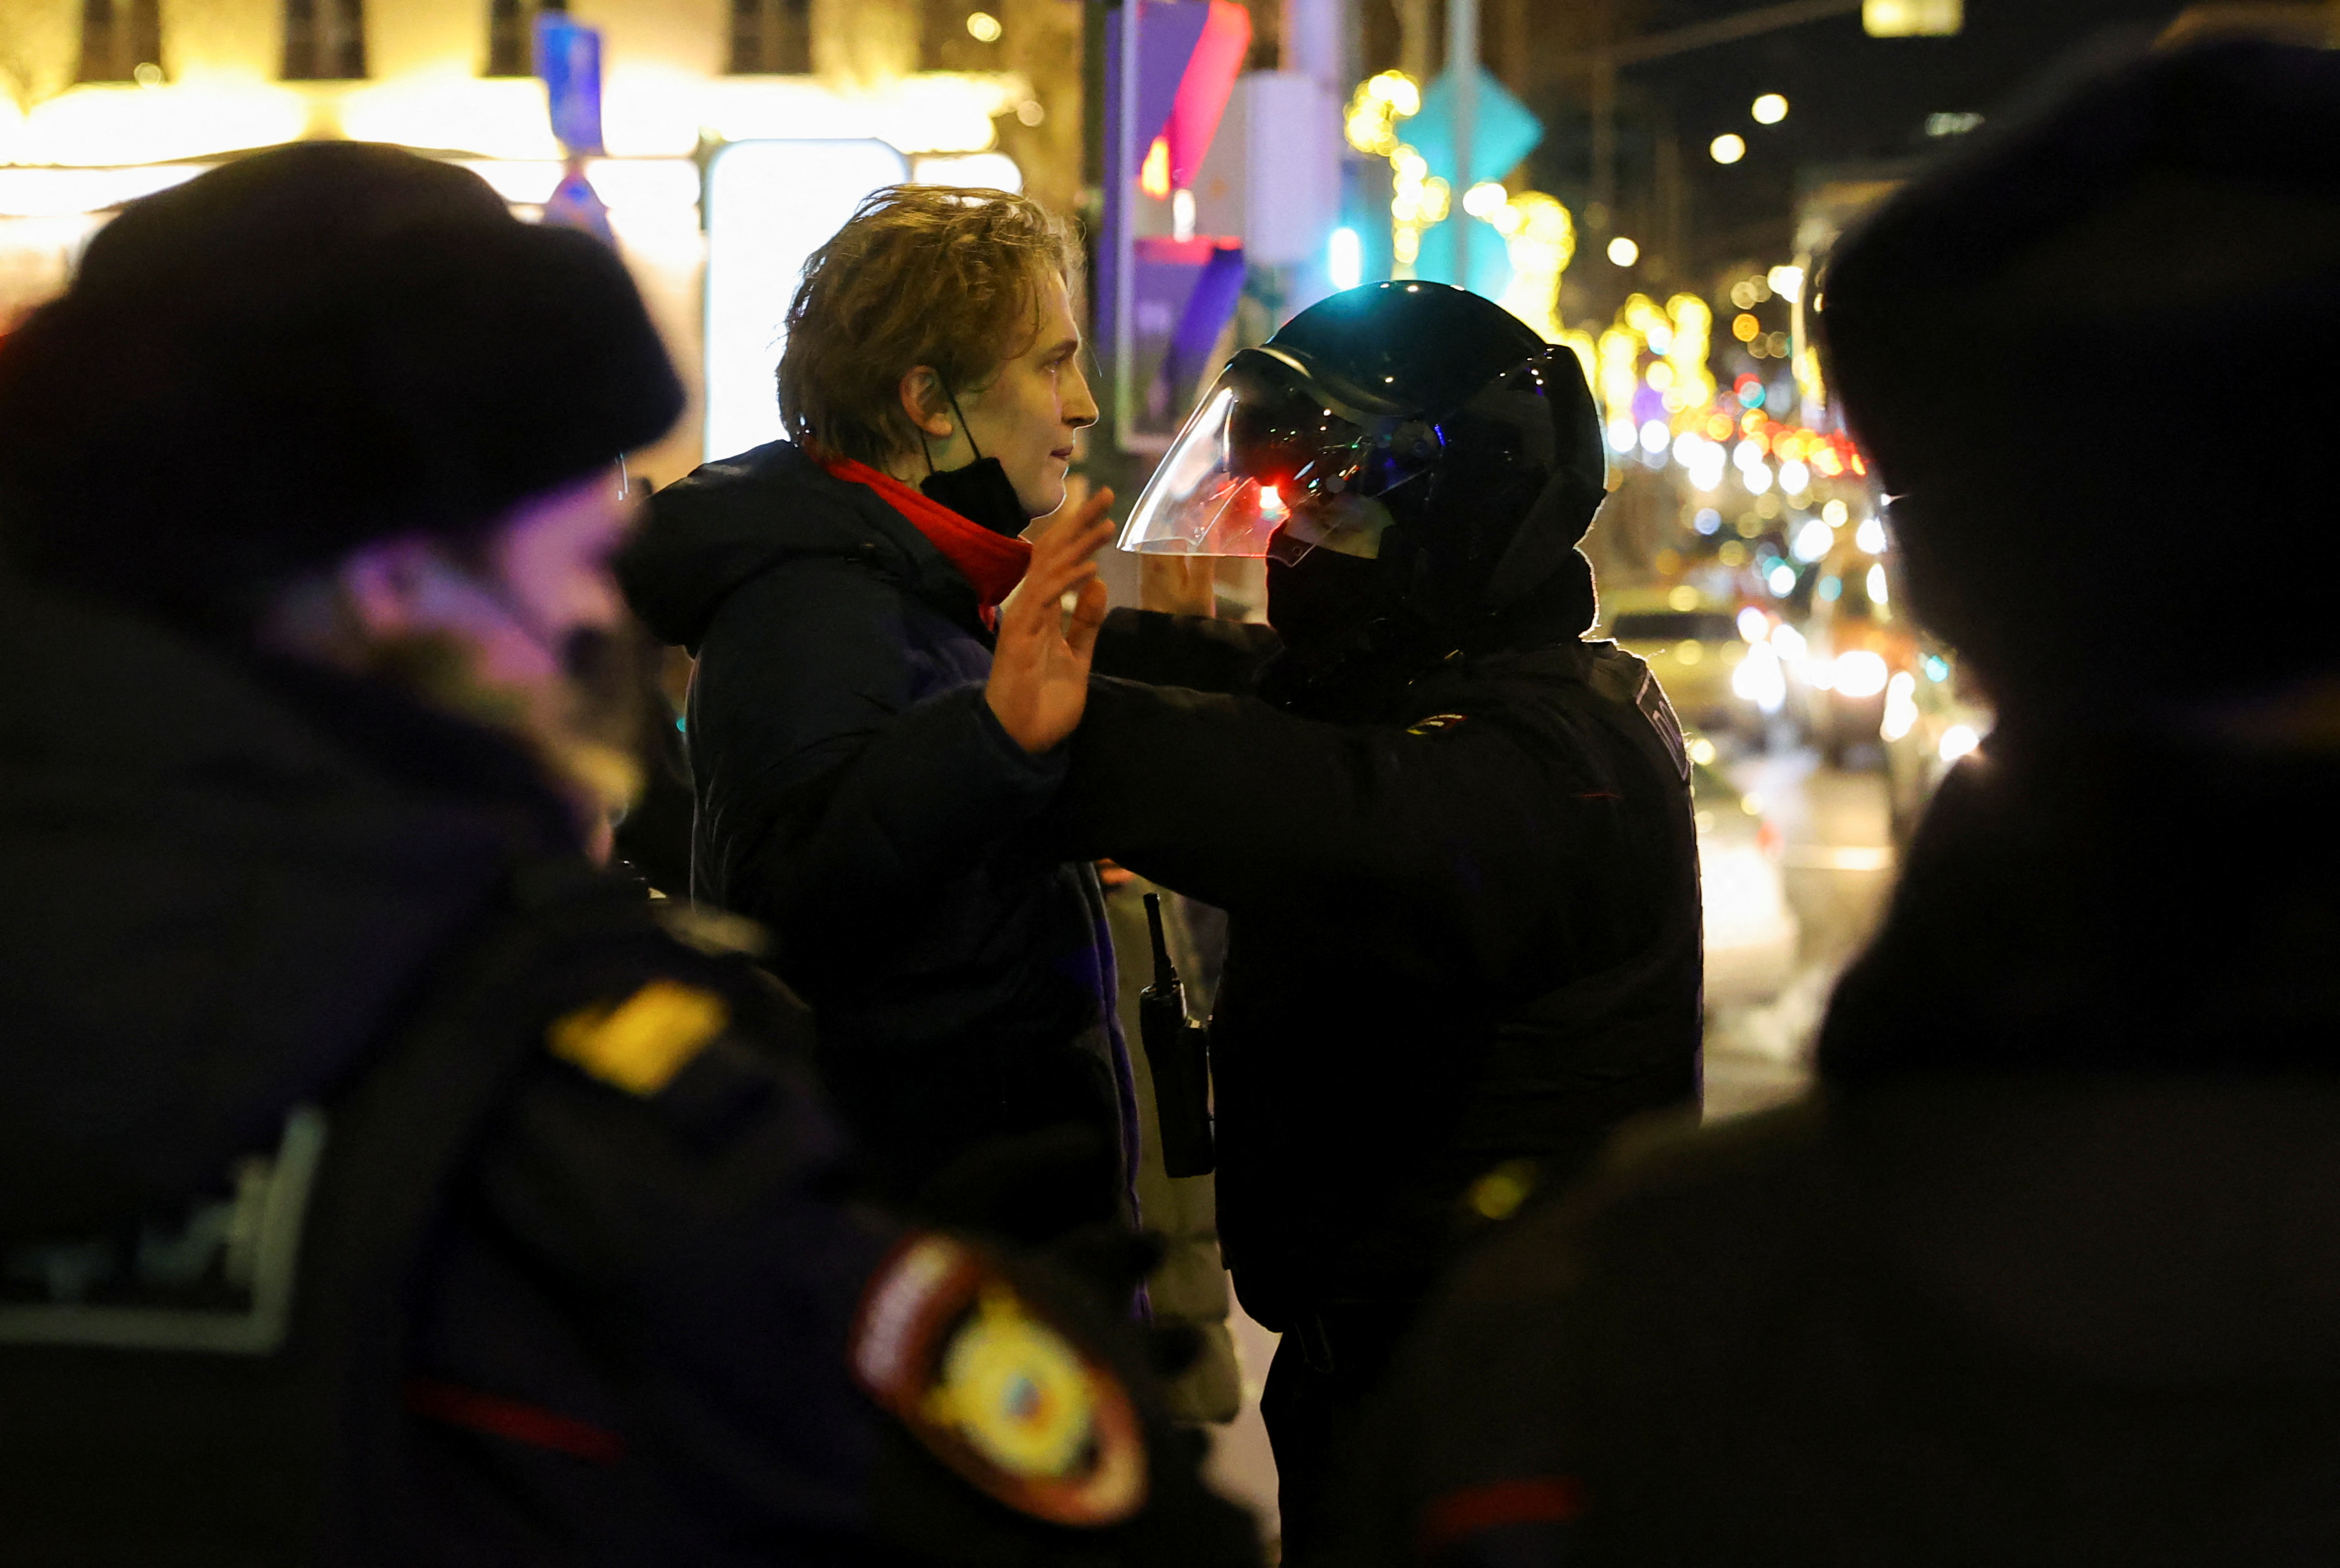 A person is detained by police during an anti-war protest in Moscow, Russia, on February 24.